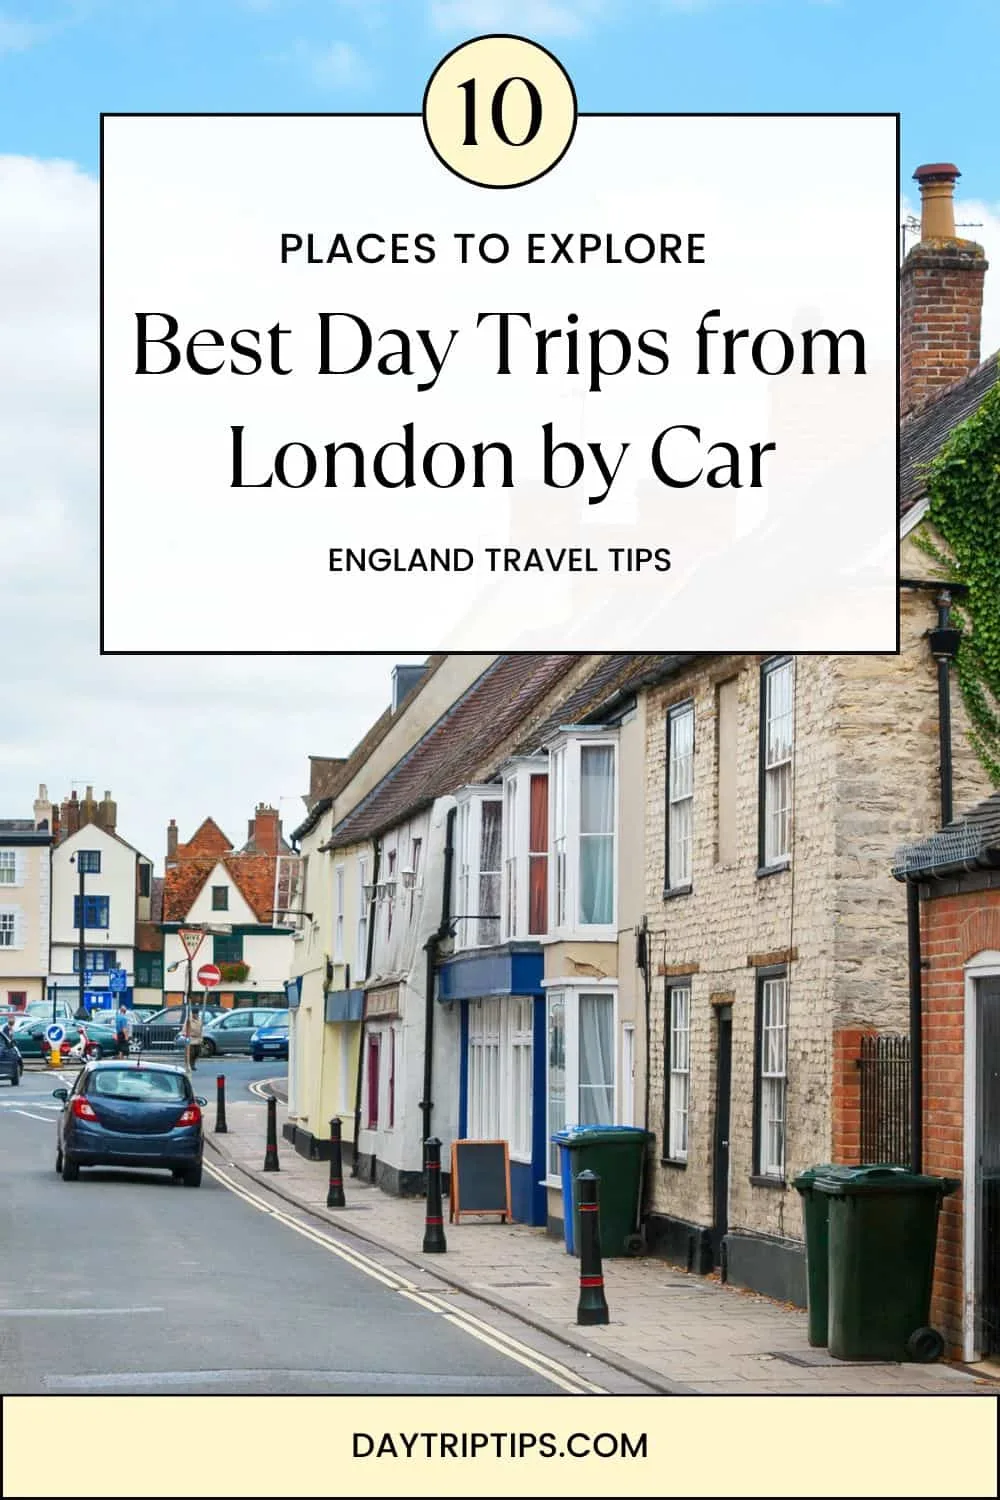 Best Day Trips from London by Car